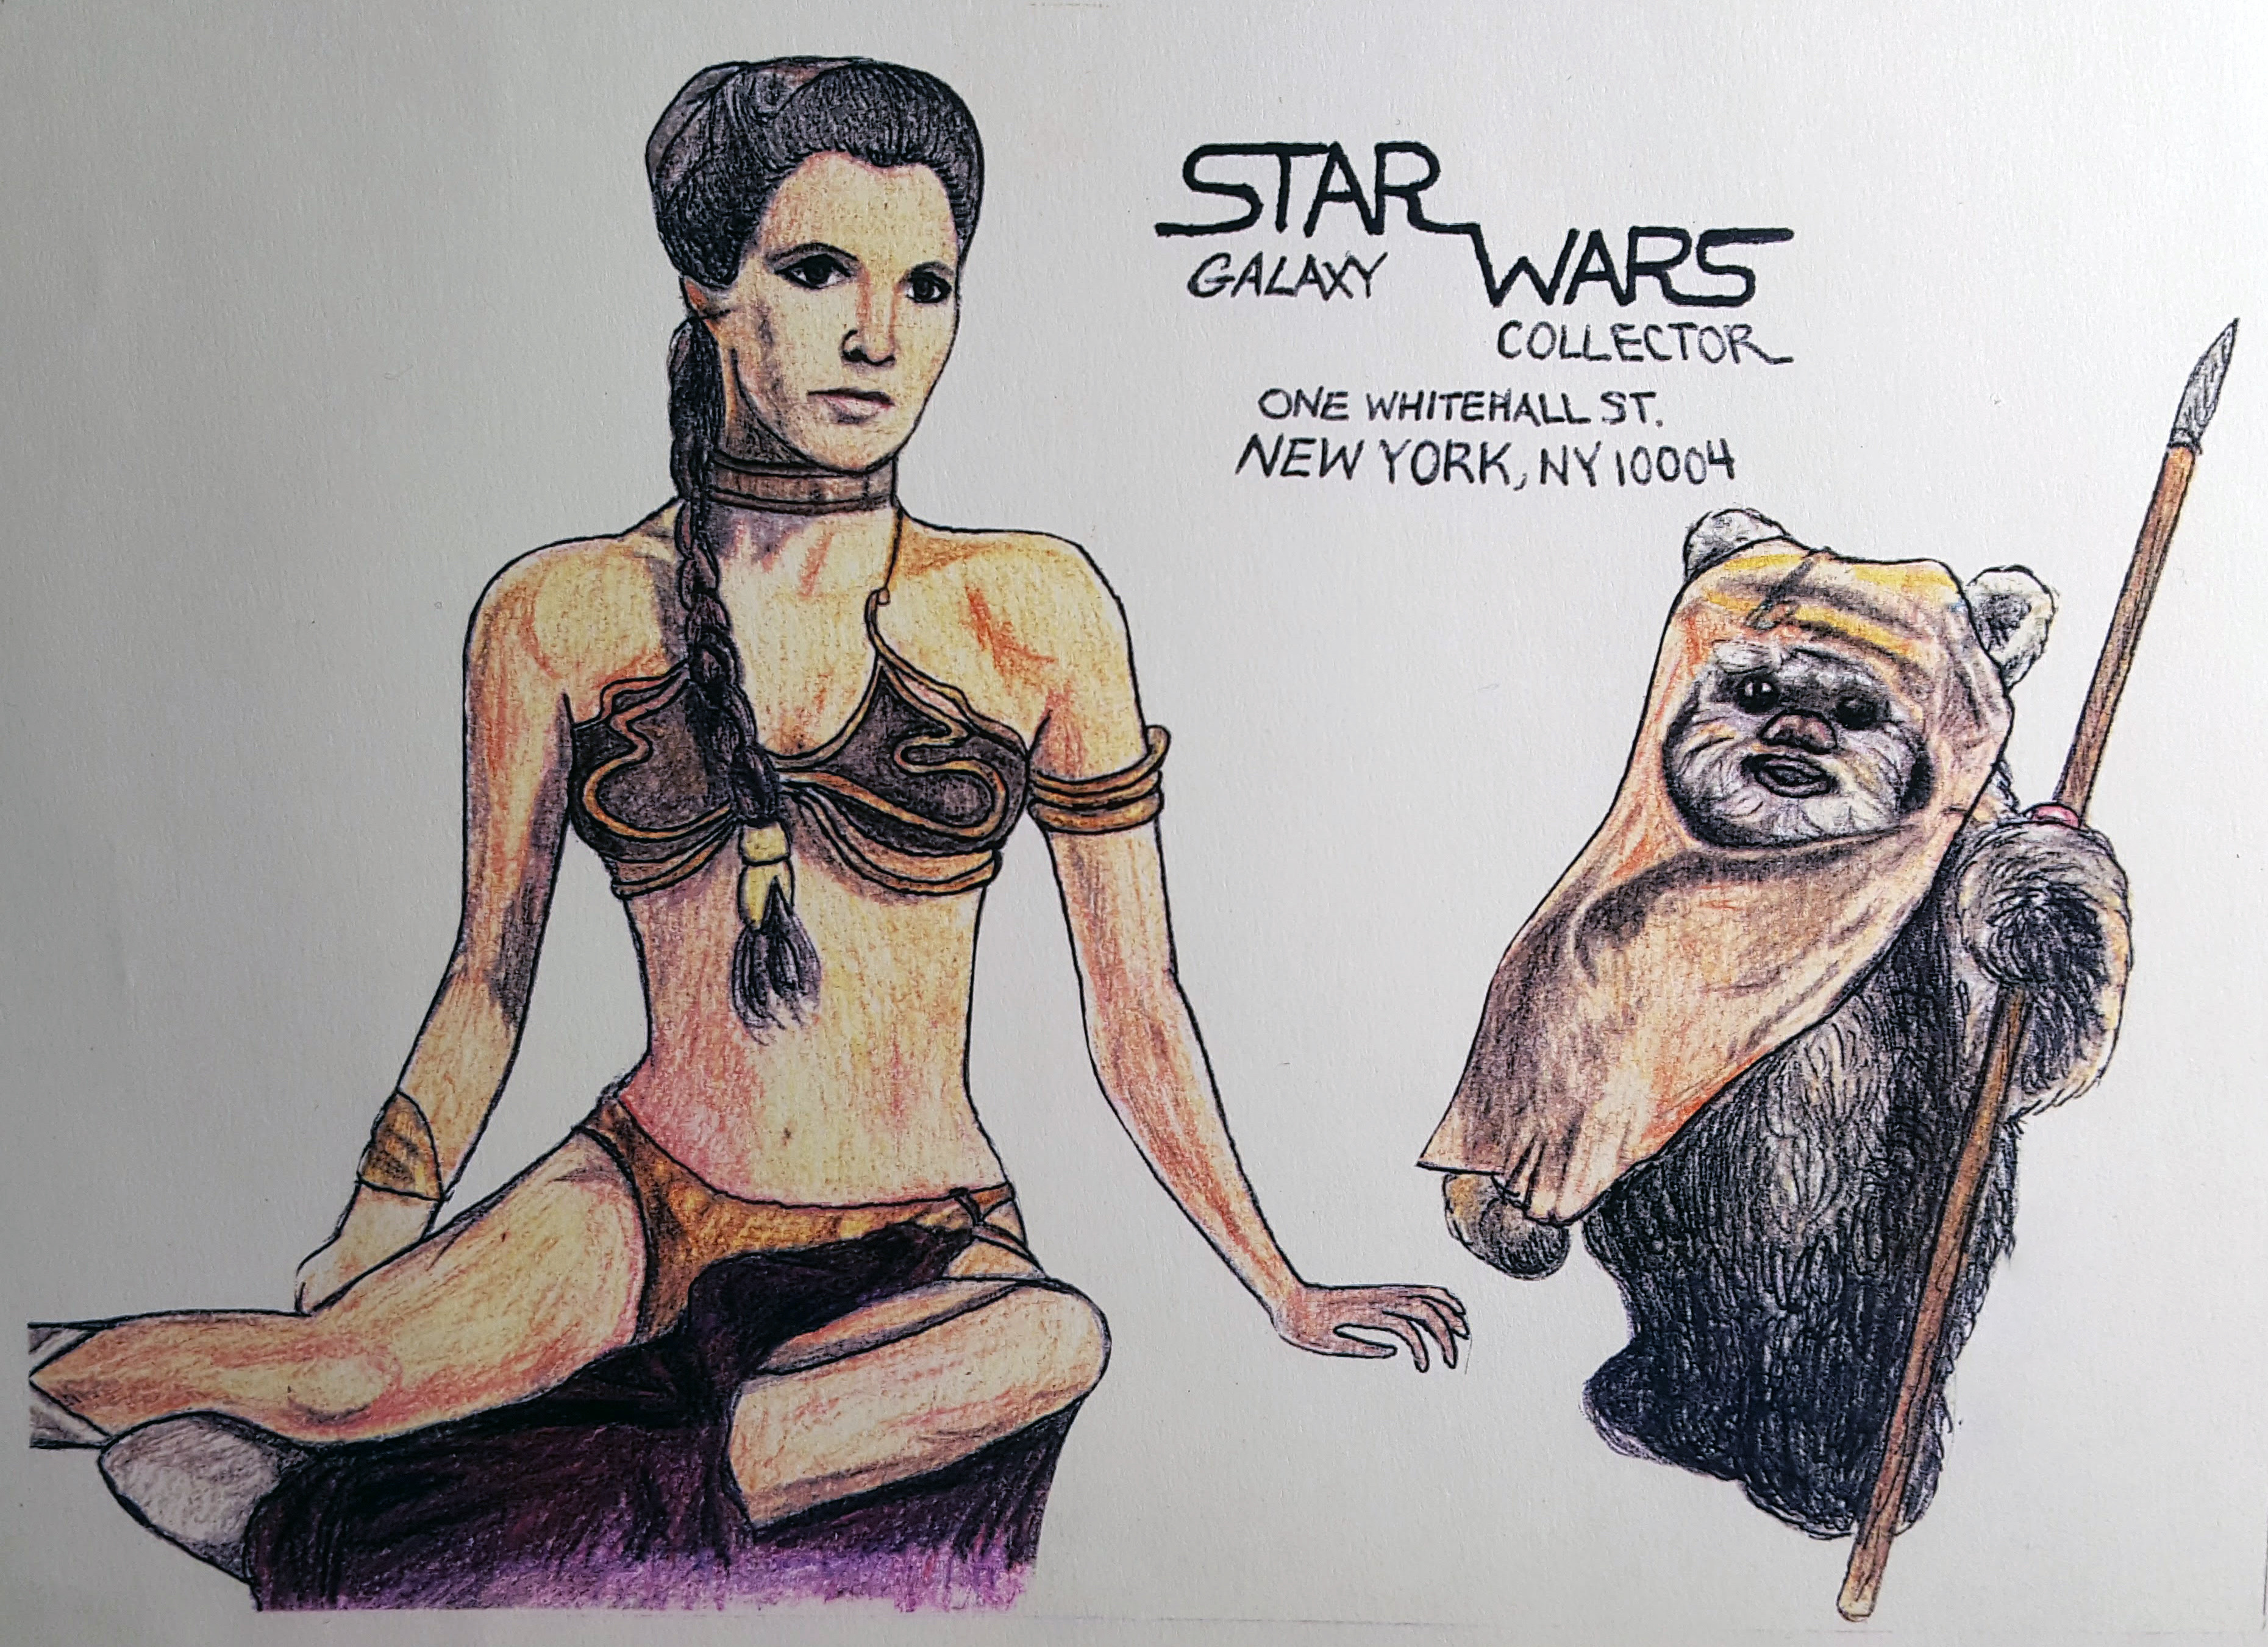 After 2 of my envelopes were published in the fan mail section of Star Wars Galaxy magazine (issues 12 and 13), I started sending envelopes to the replacement magazine, Star Wars Galaxy Collector, which  never ended up printing fan mail.